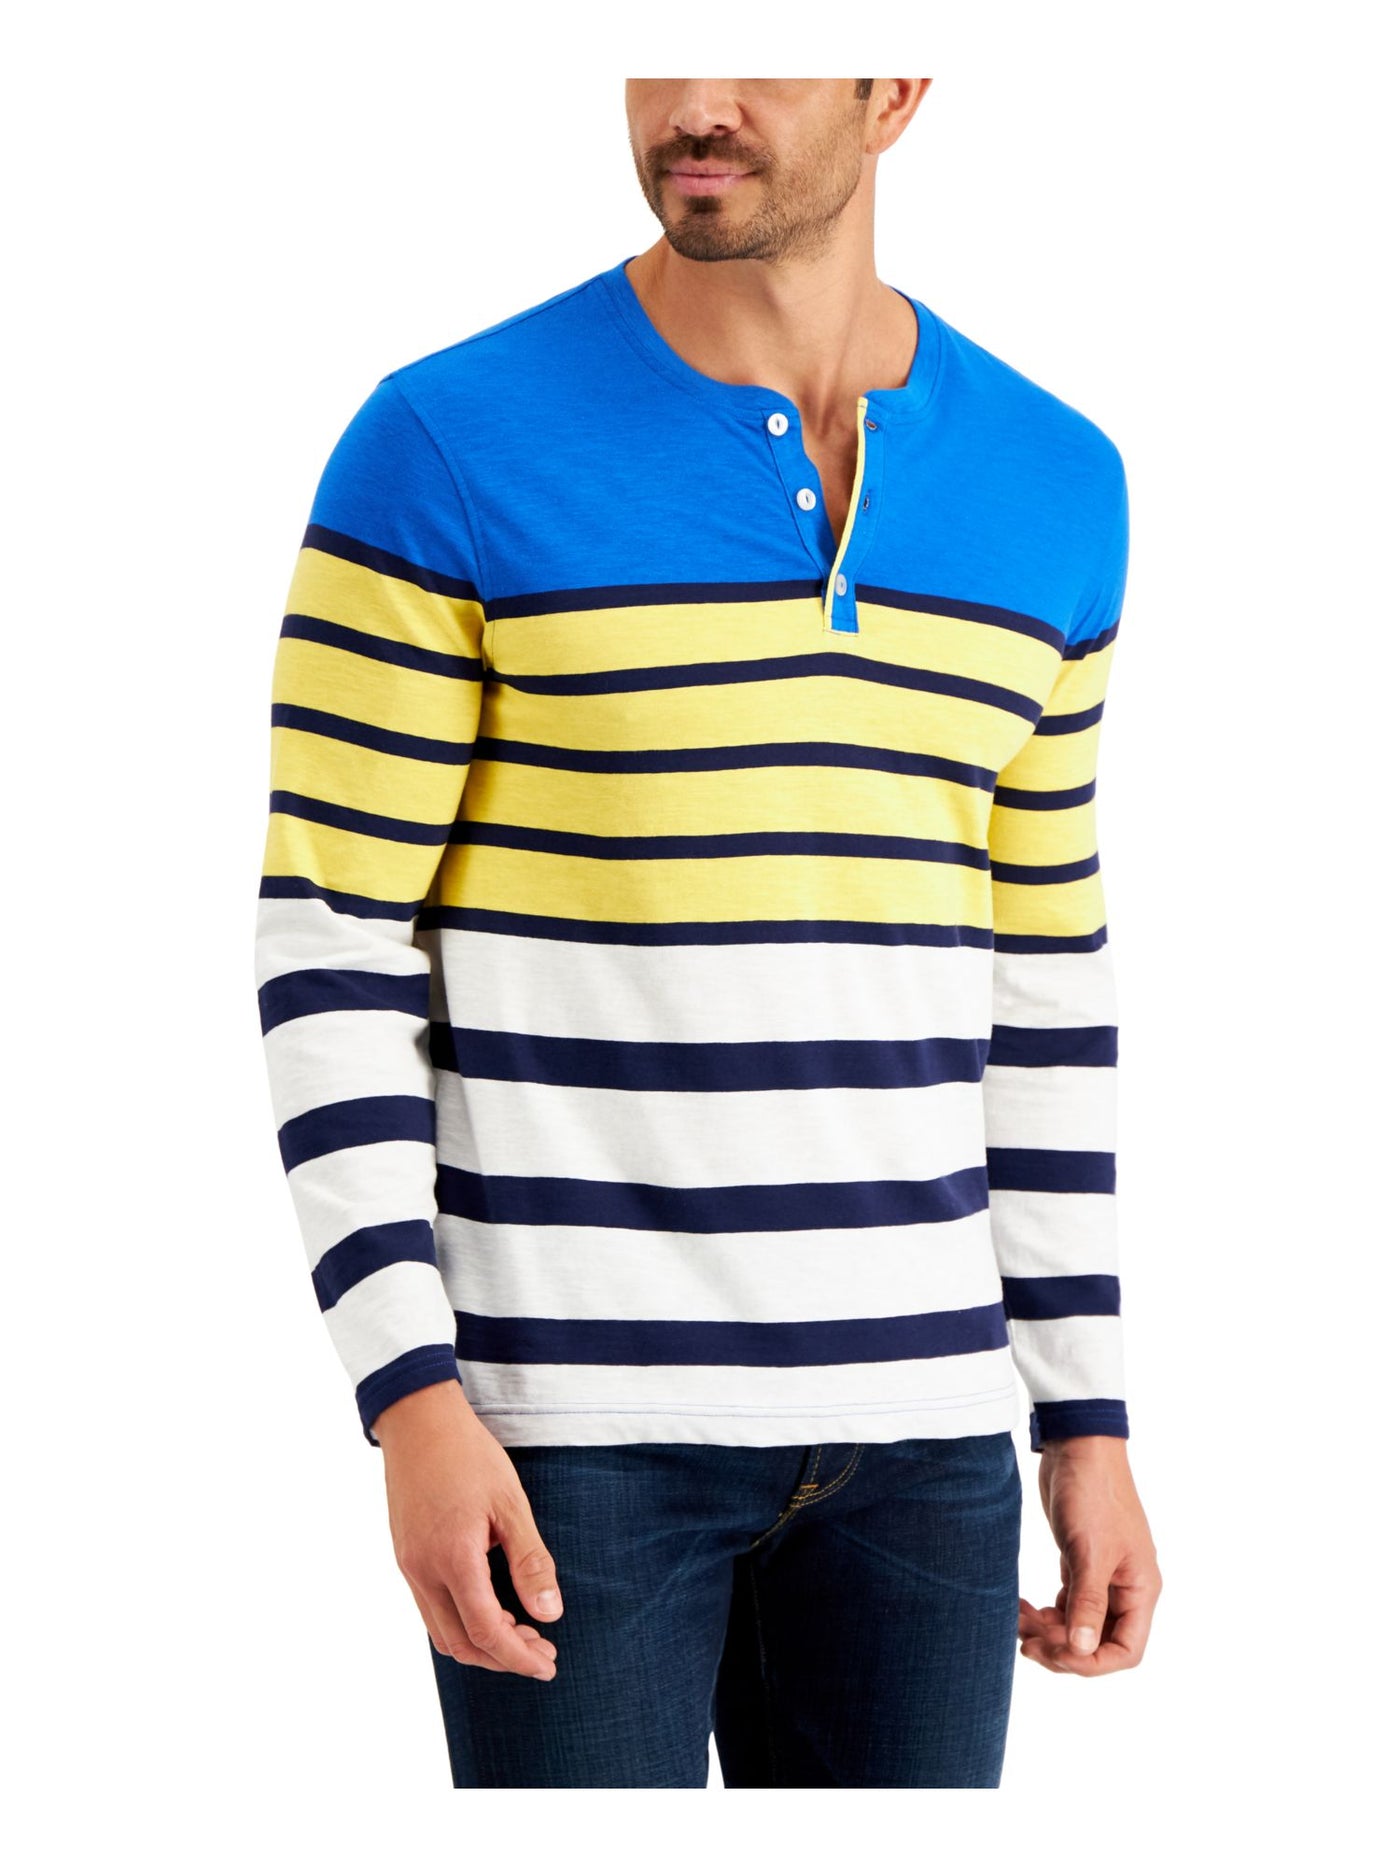 CLUBROOM Mens Blue Striped Classic Fit Henley Shirt S